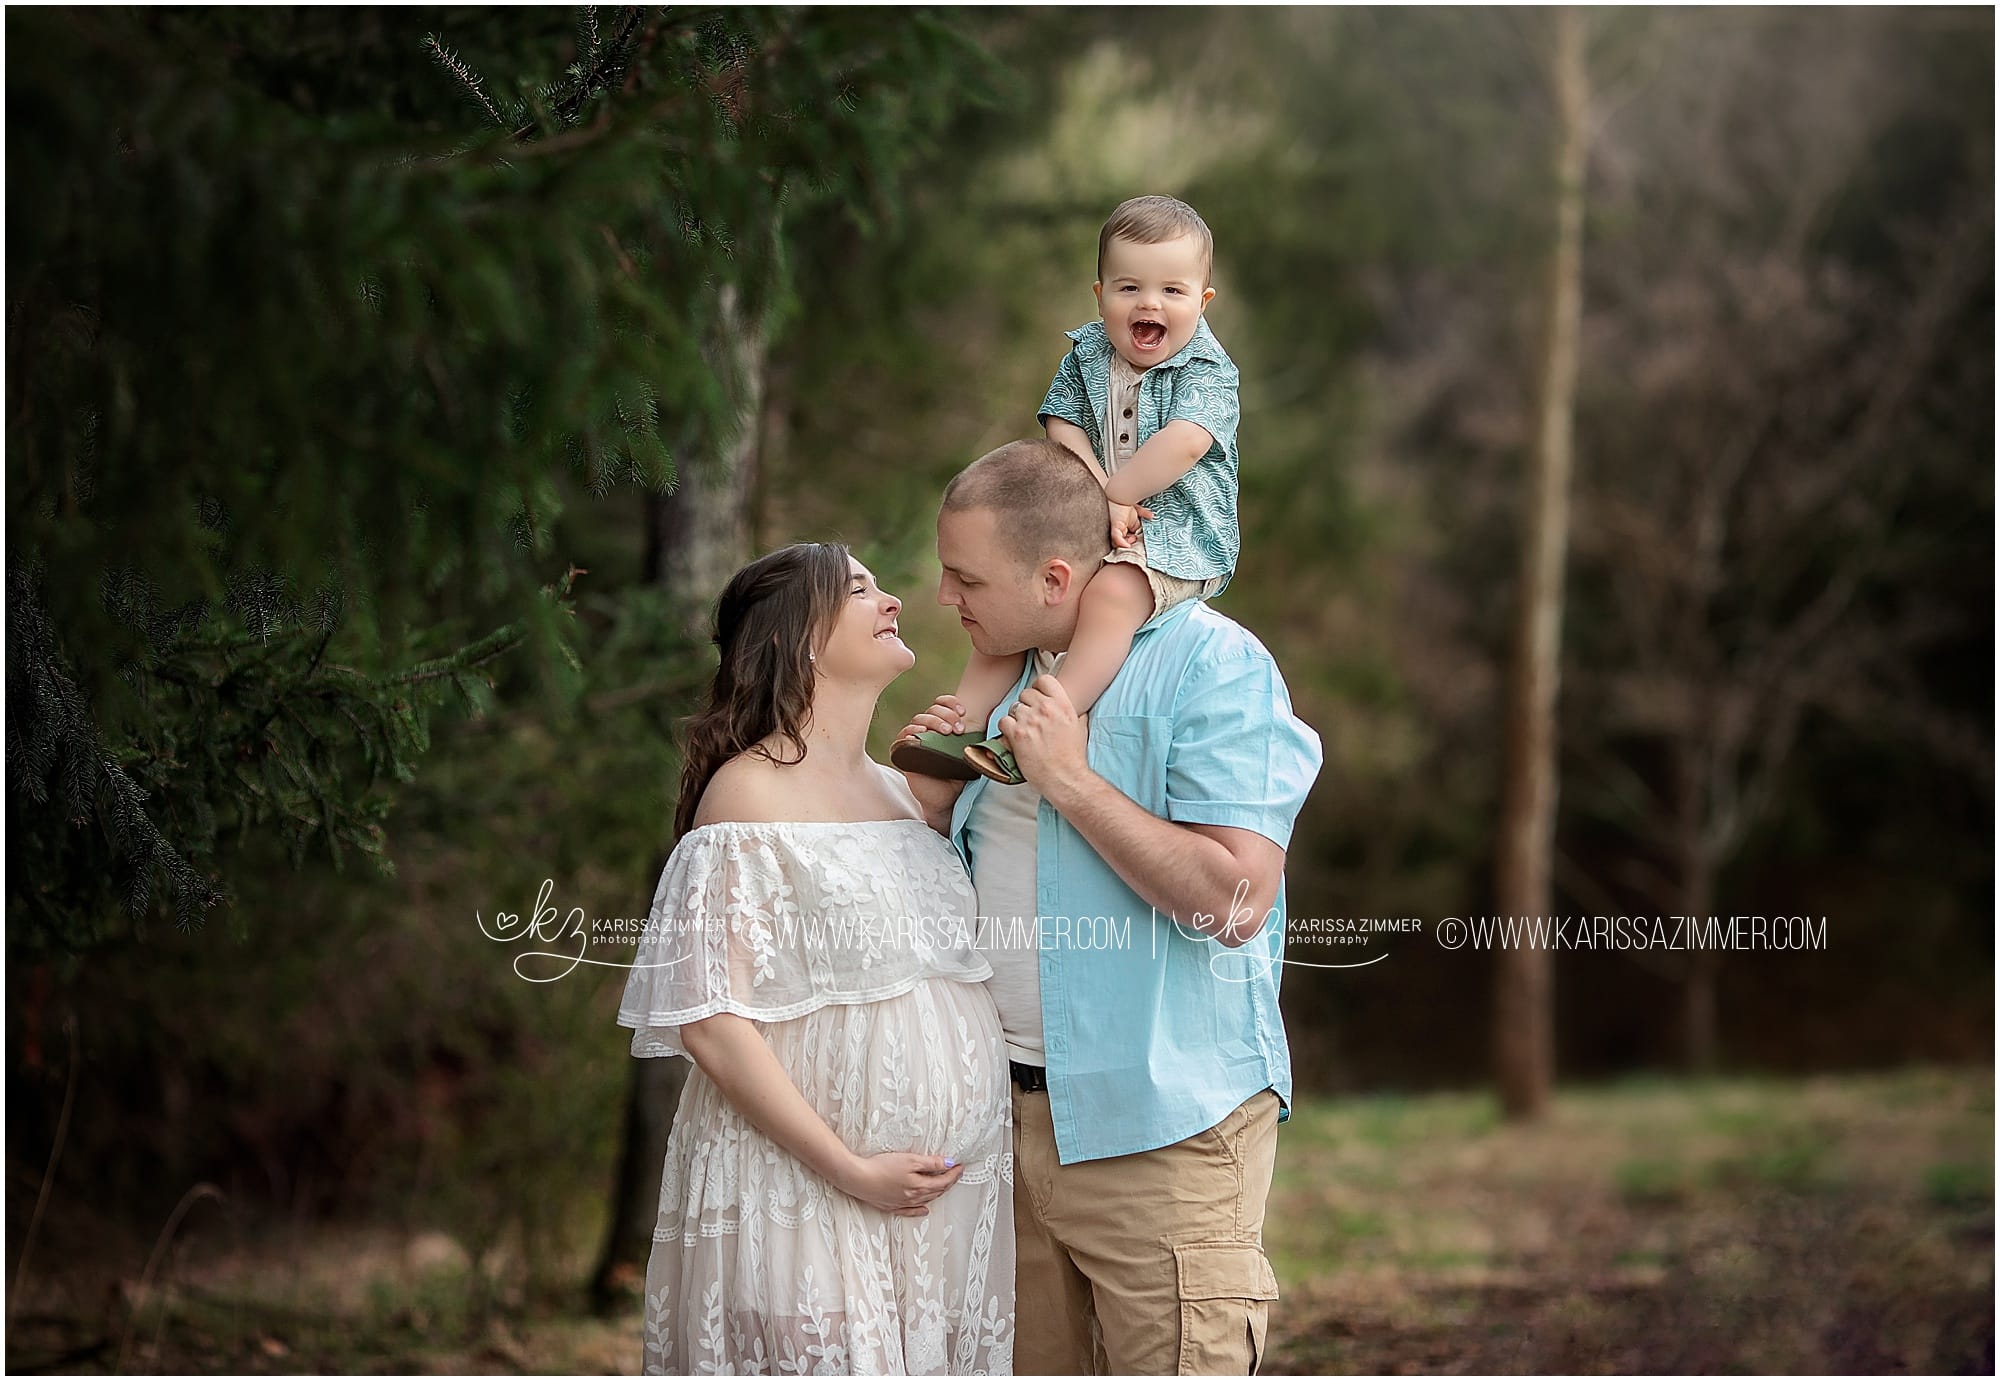 family and maternity photographer captures outdoor maternity photography images near camp hill pa